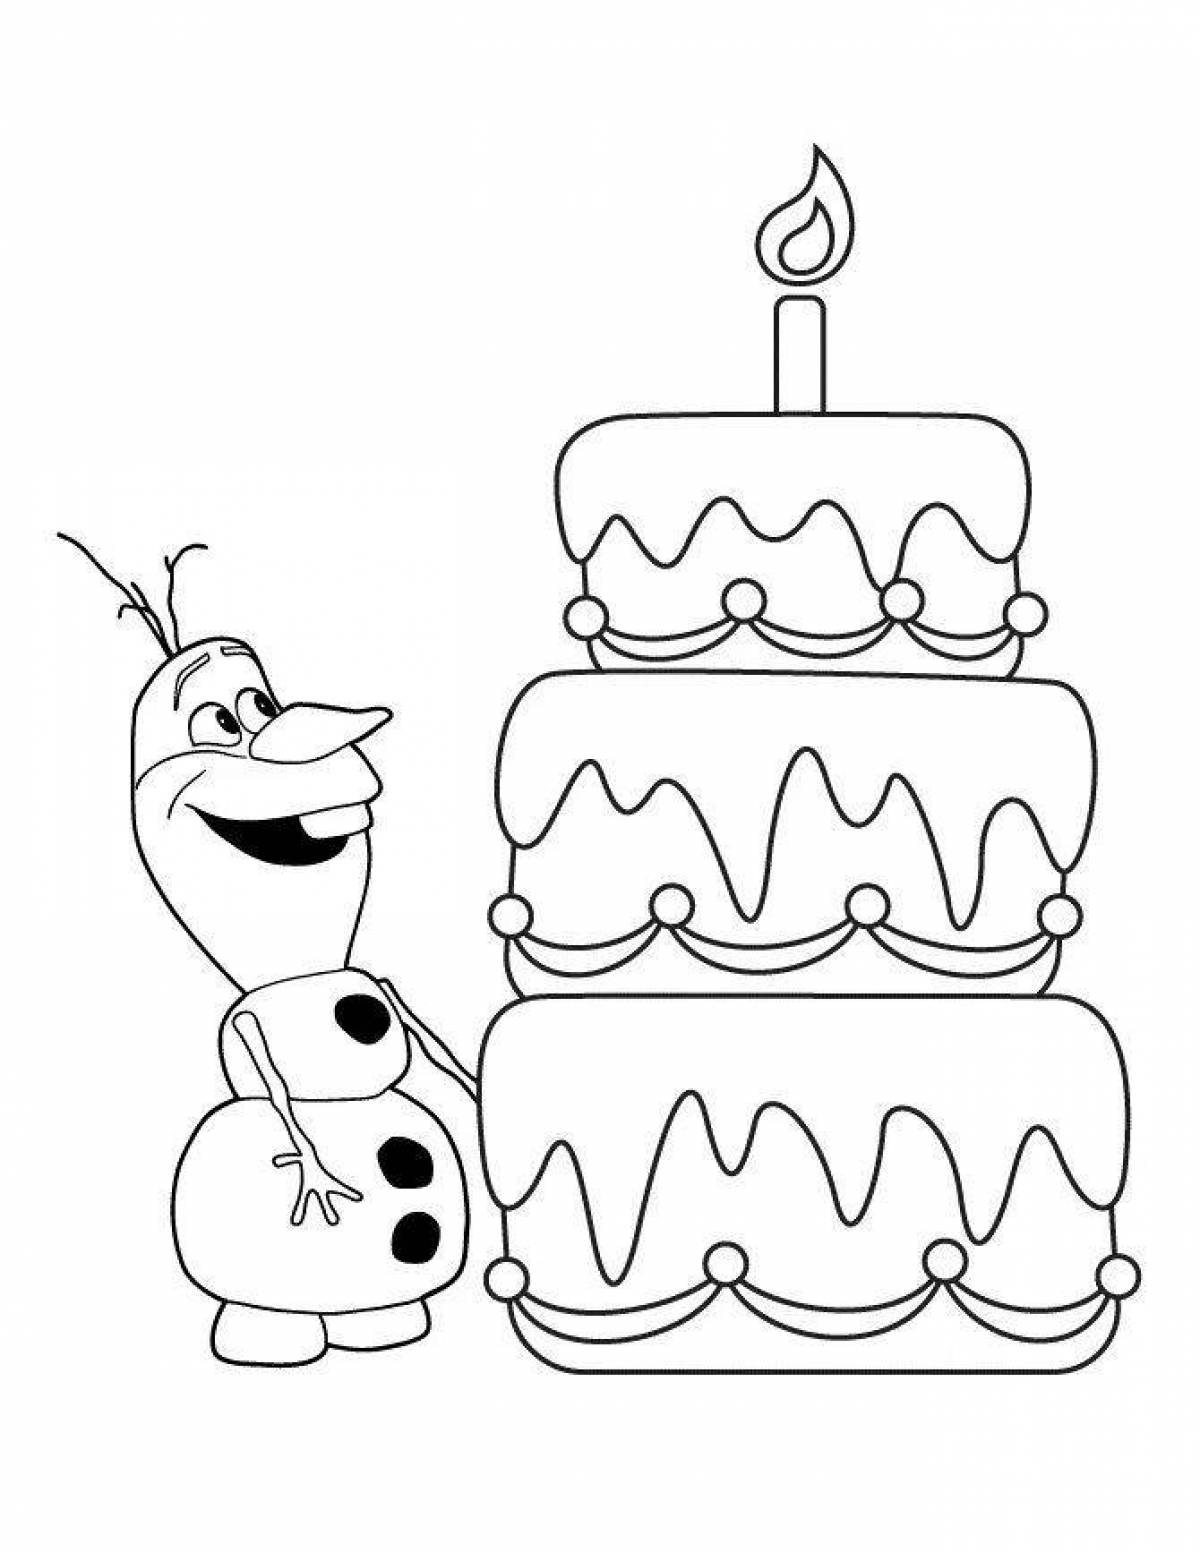 Glowing snowman birthday coloring page